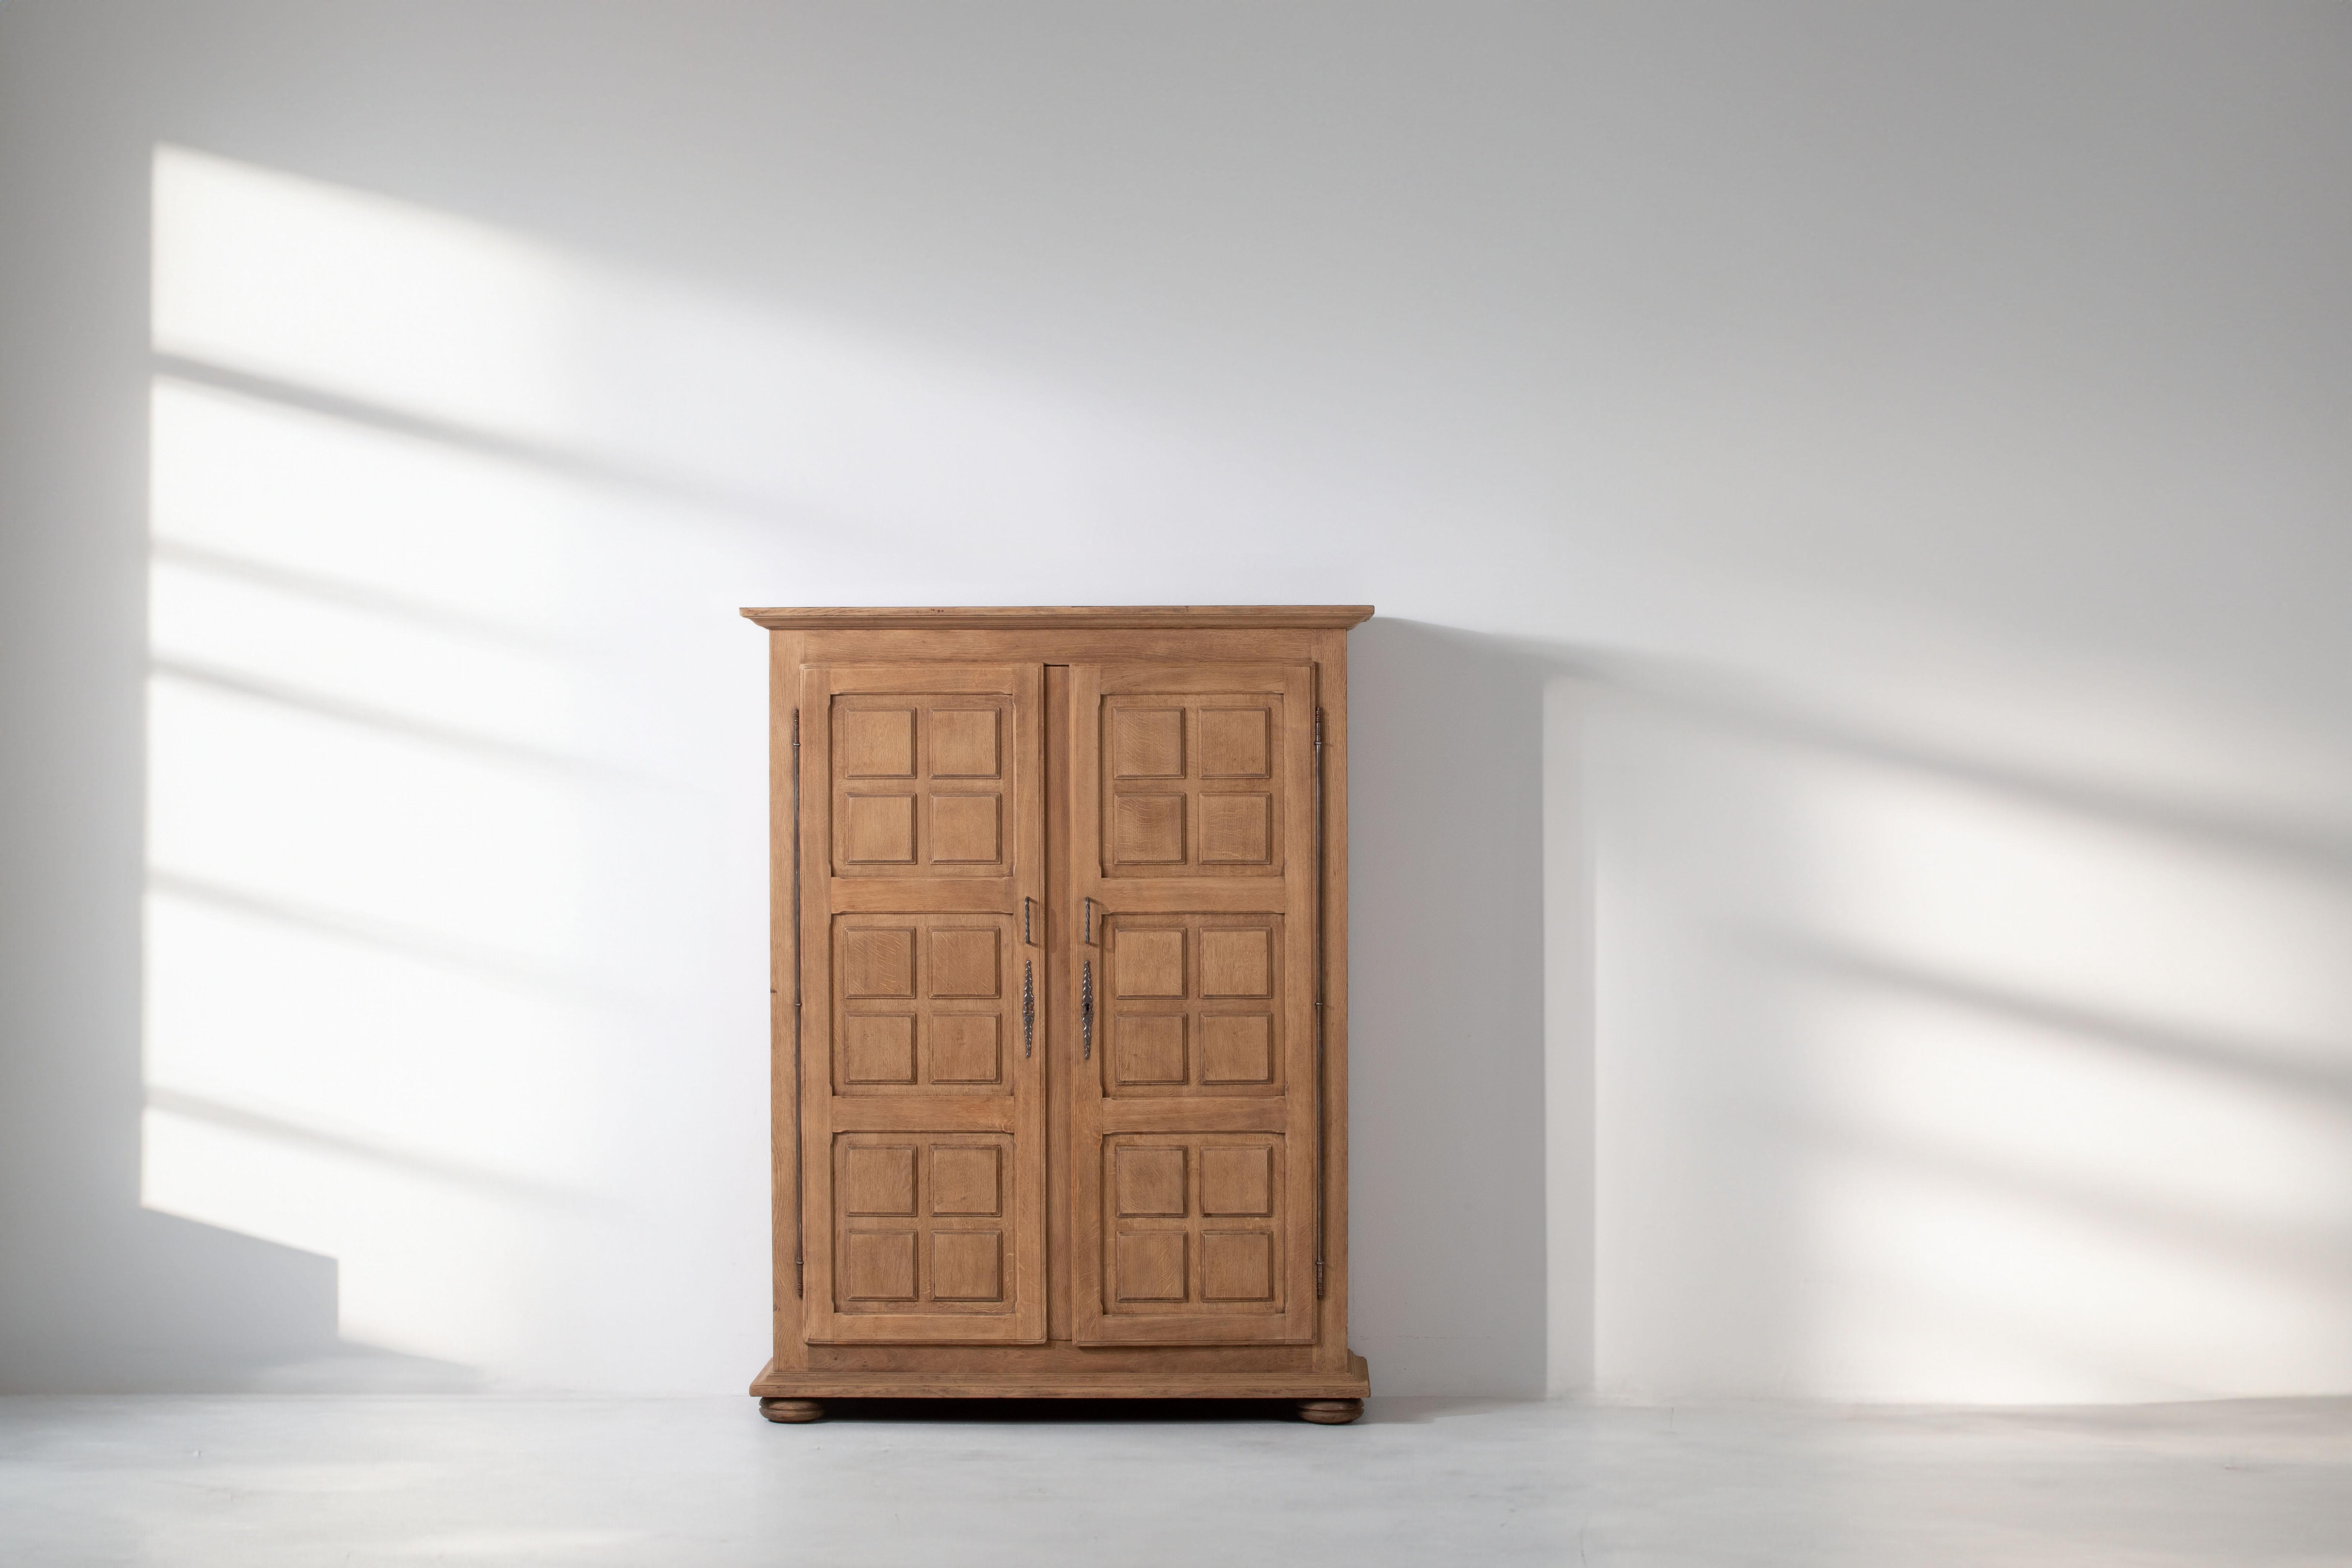 Introducing a captivating Solid Oak Wardrobe from the 1950s, this exceptional French piece showcases distinct square patterns on its doors, drawing inspiration from the bold aesthetics of brutalism. Crafted with meticulous attention to detail, the